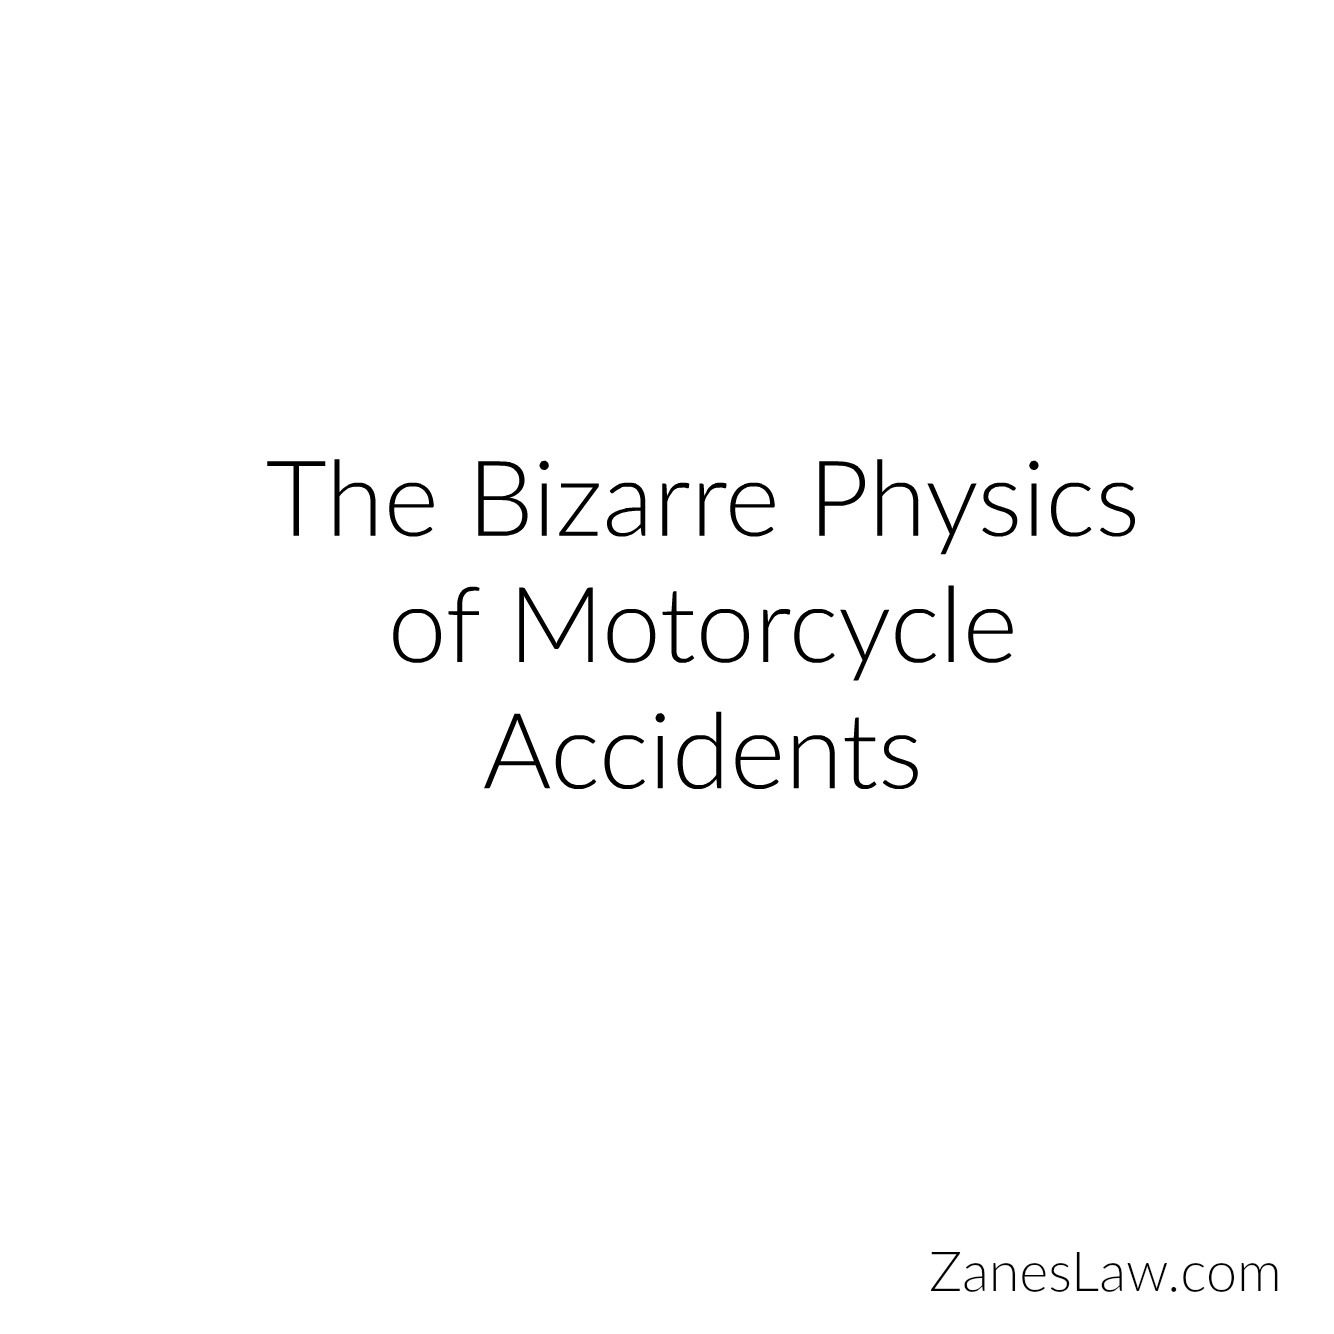 The Bizarre Physics of Motorcycle Accidents